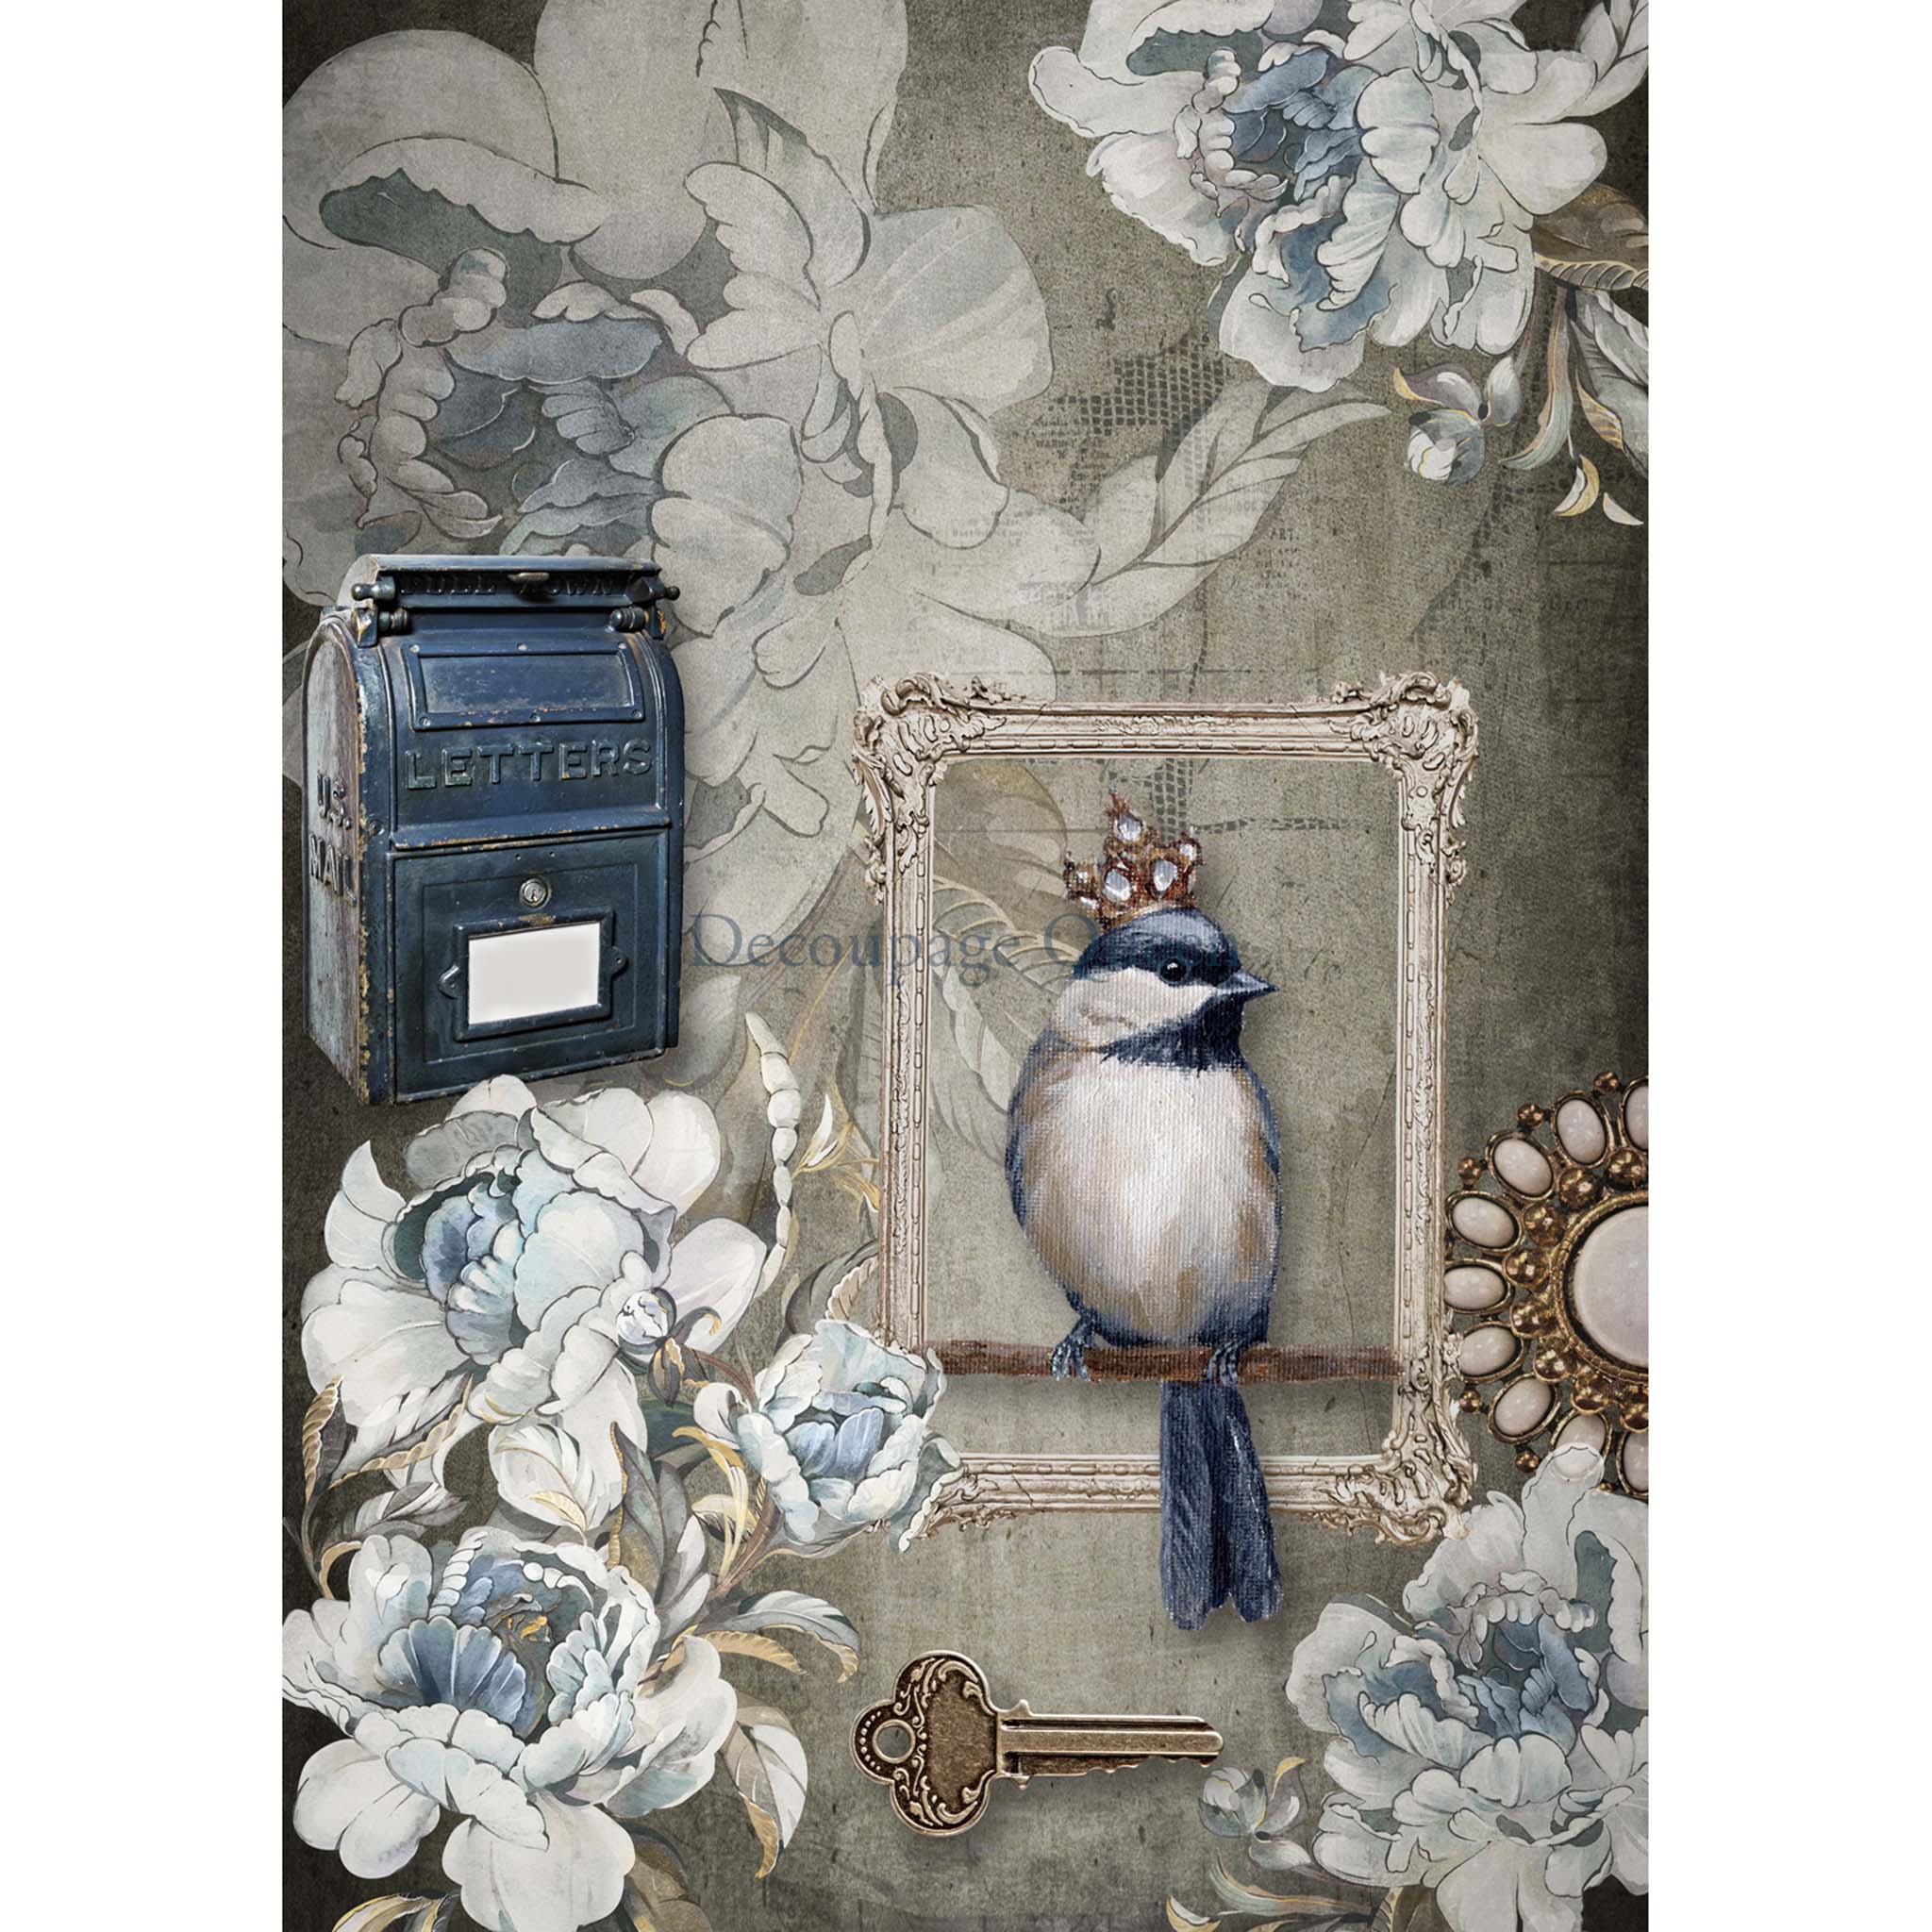 A0 rice paper design that features a distressed background behind a nostalgic mailbox, delicate flowers in white and blue, and a regal bird in a picture frame. White borders are on the sides.